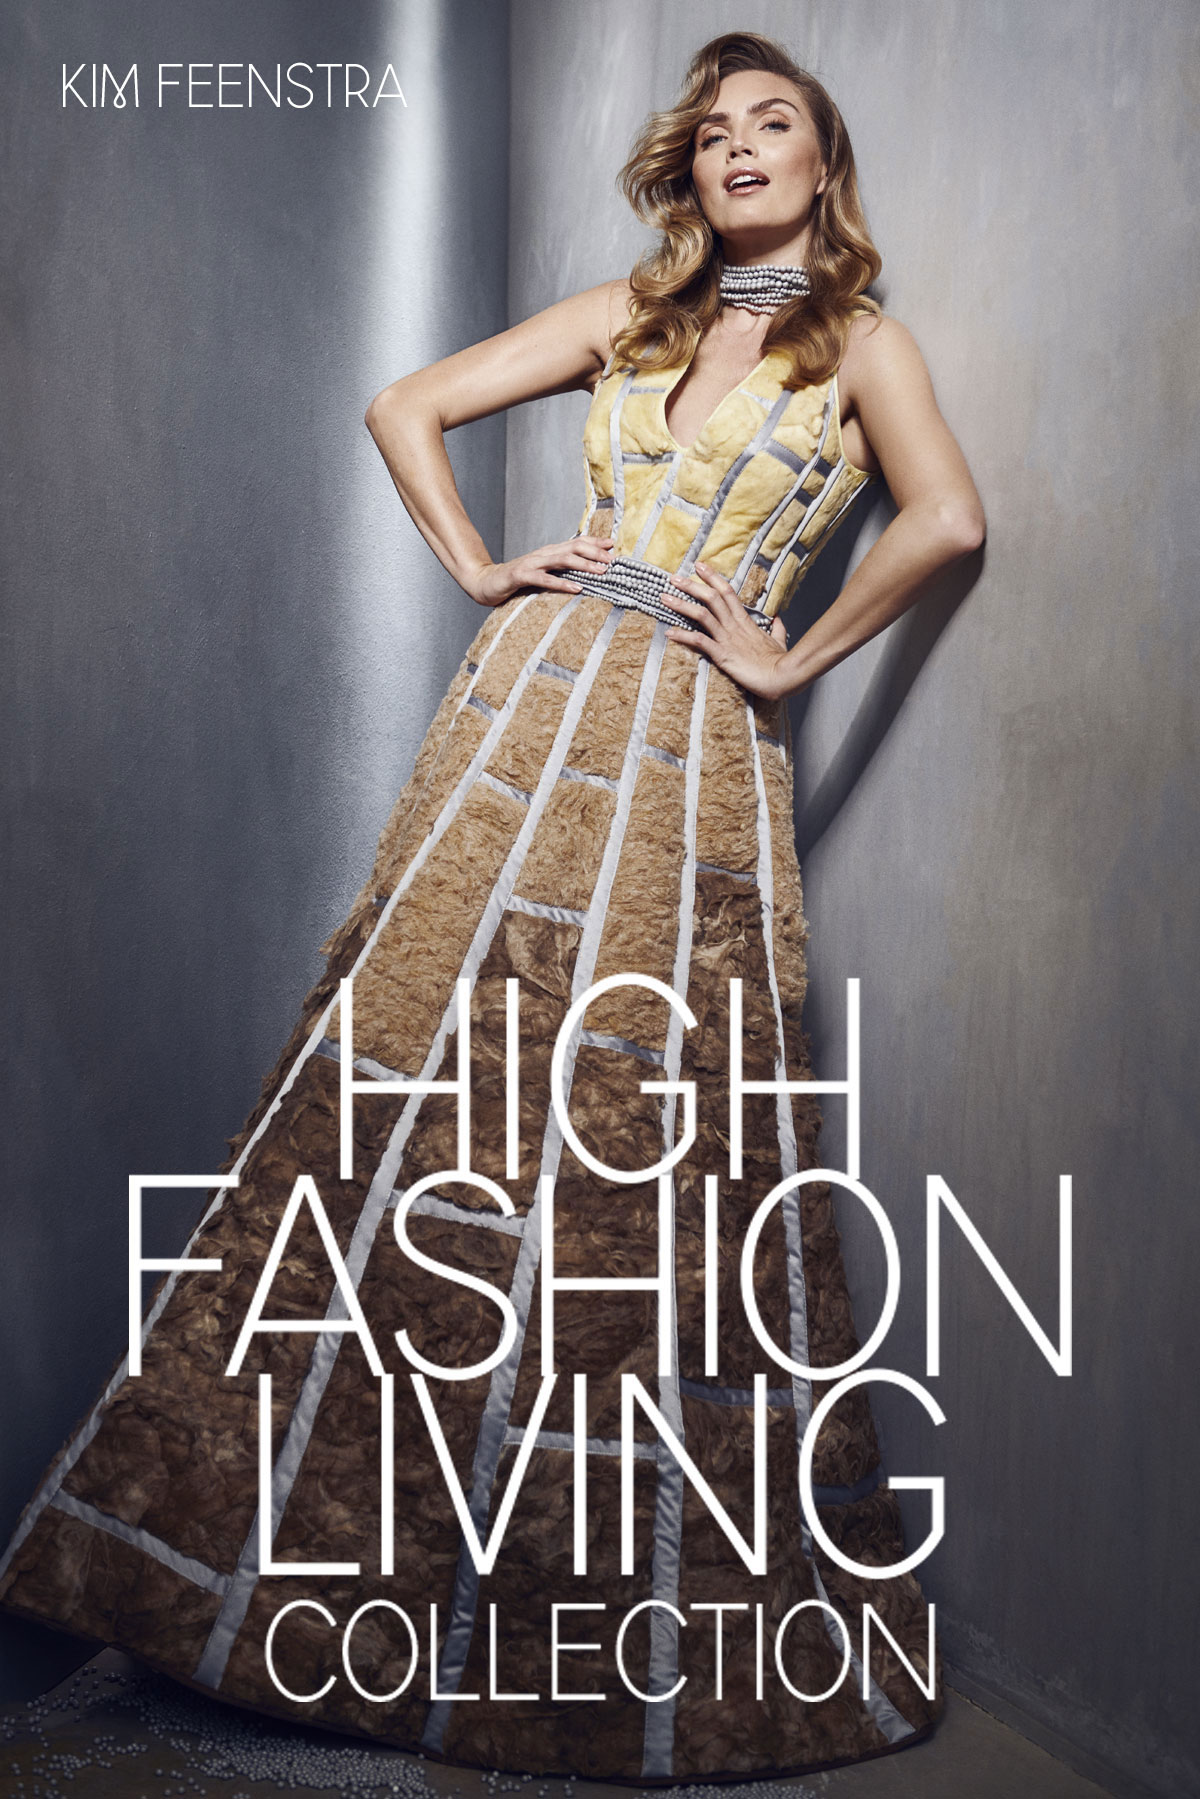 High Fashion Living Collection